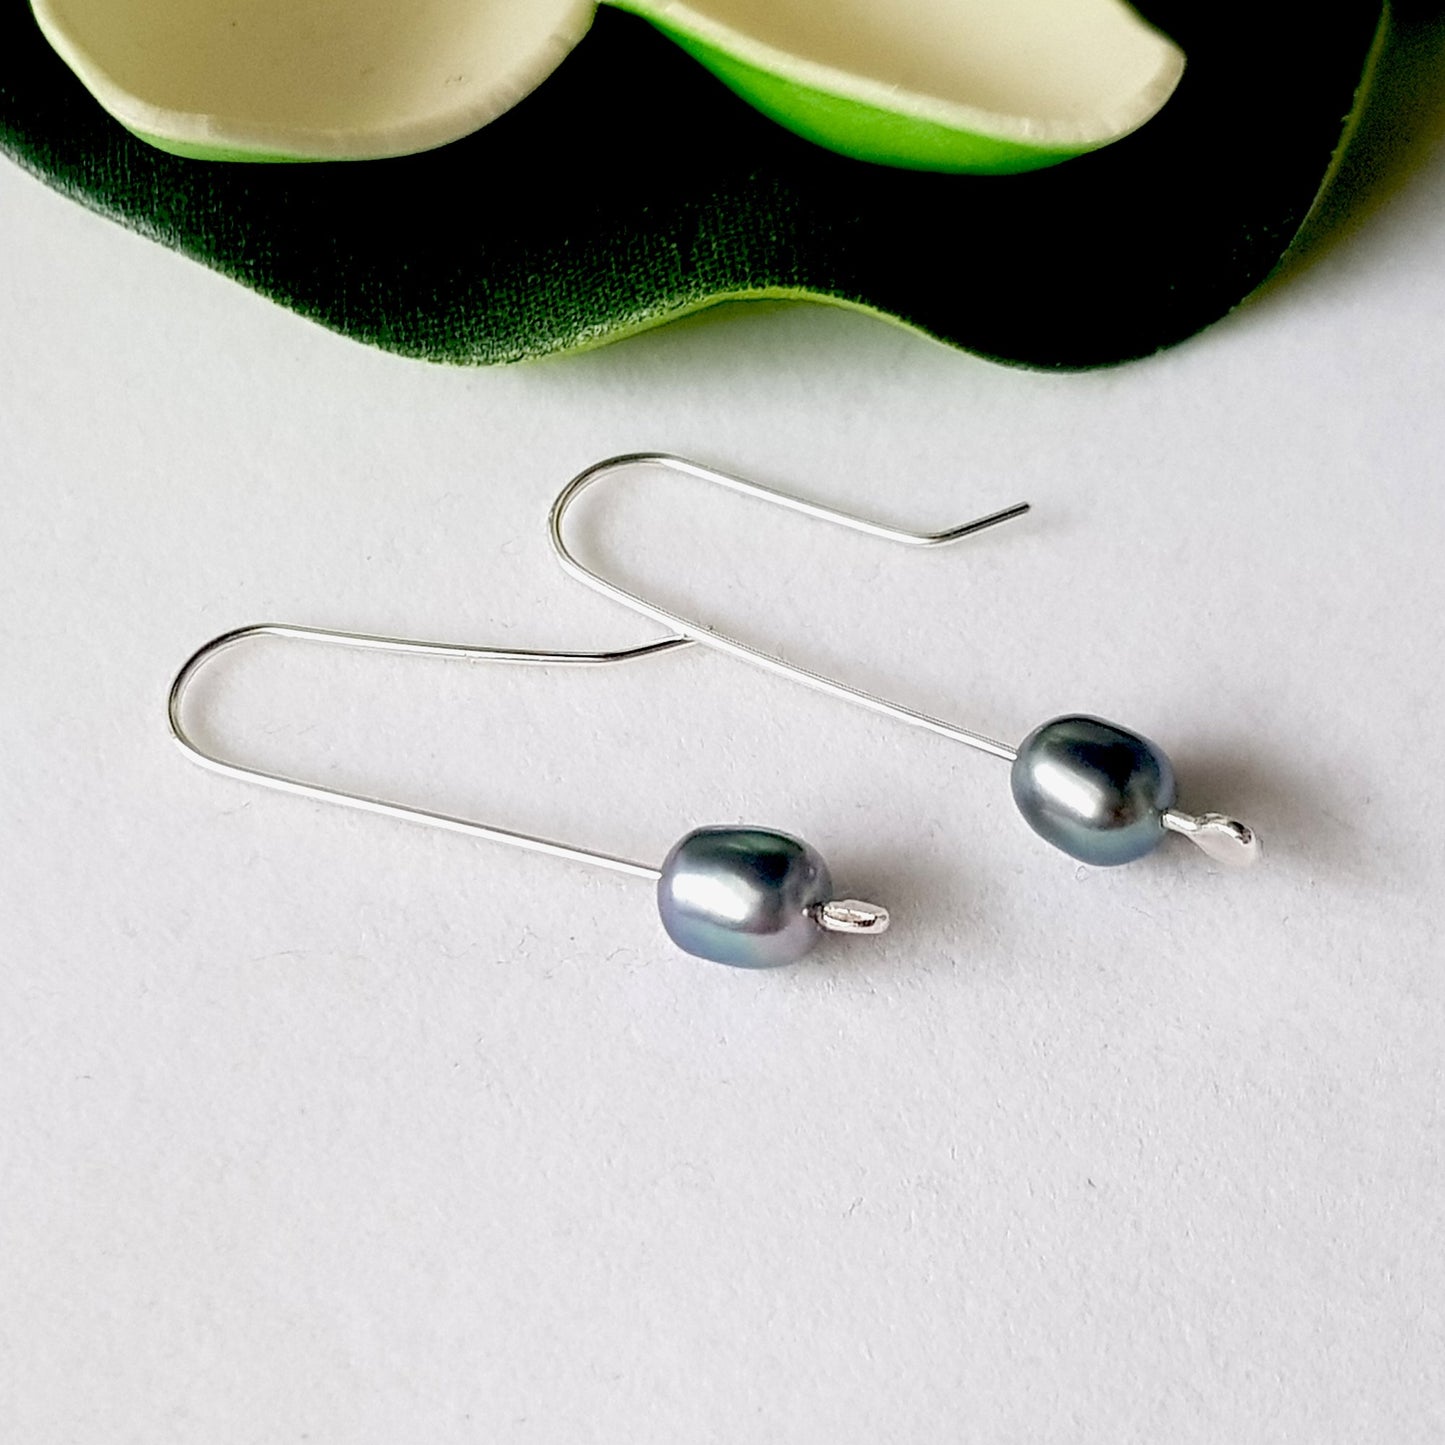 Headpins made to earrings long 60mm Sterling Silver | Kalitheo Findings